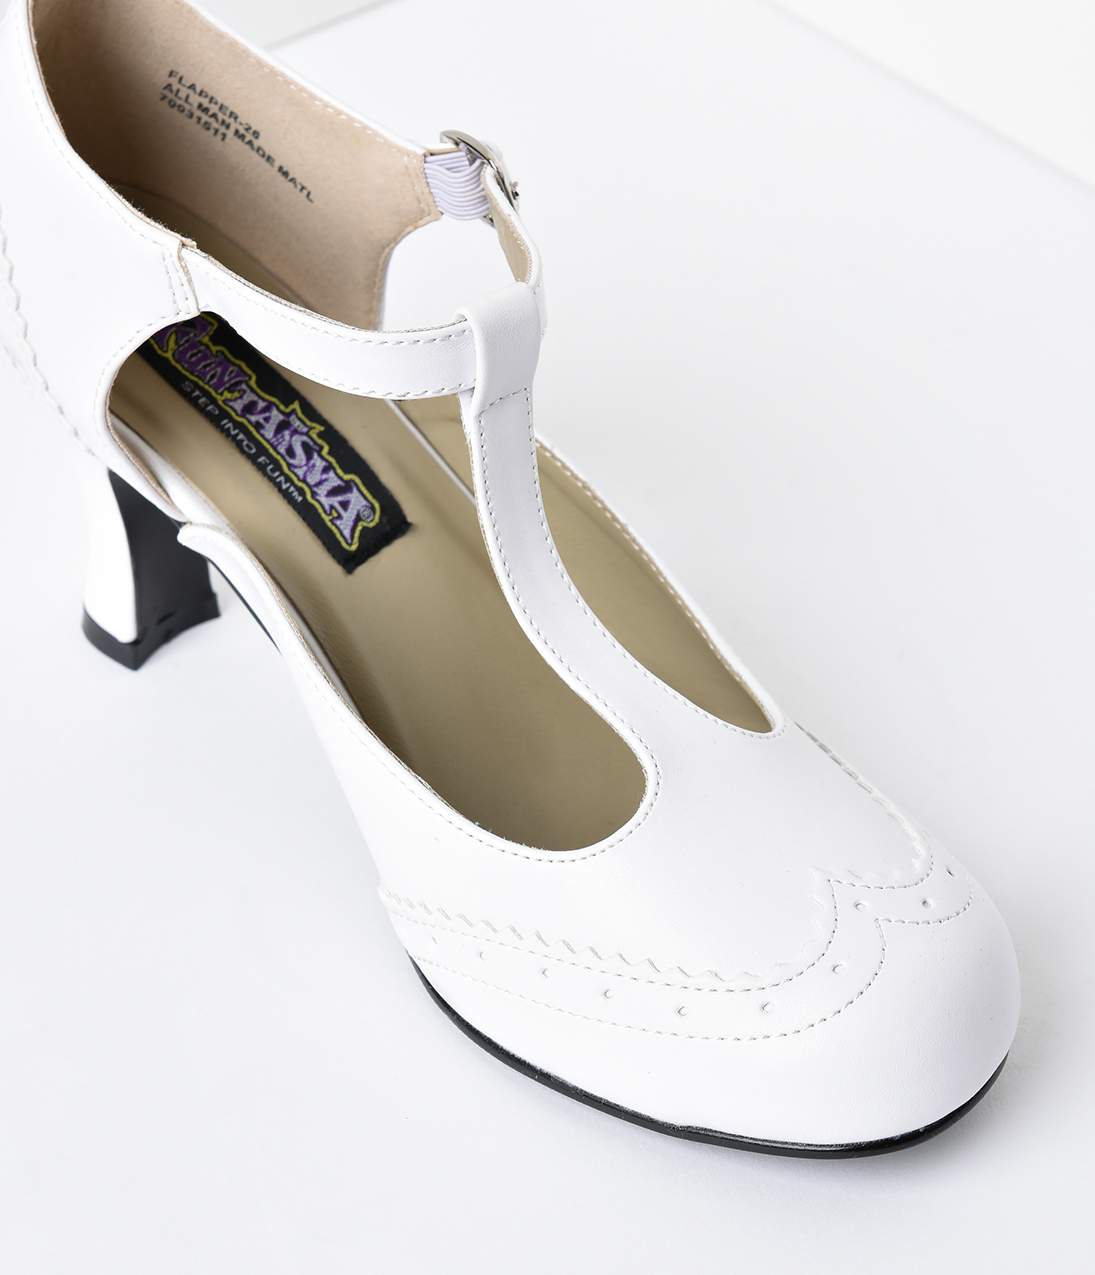 J. Adams Mary Jane Oxford Pumps - Cute Low Kitten Heels - Retro Round Toe  Shoe with Ankle Strap - Kym, Black and White Vegan Leather, 8 : Amazon.ca:  Clothing, Shoes & Accessories